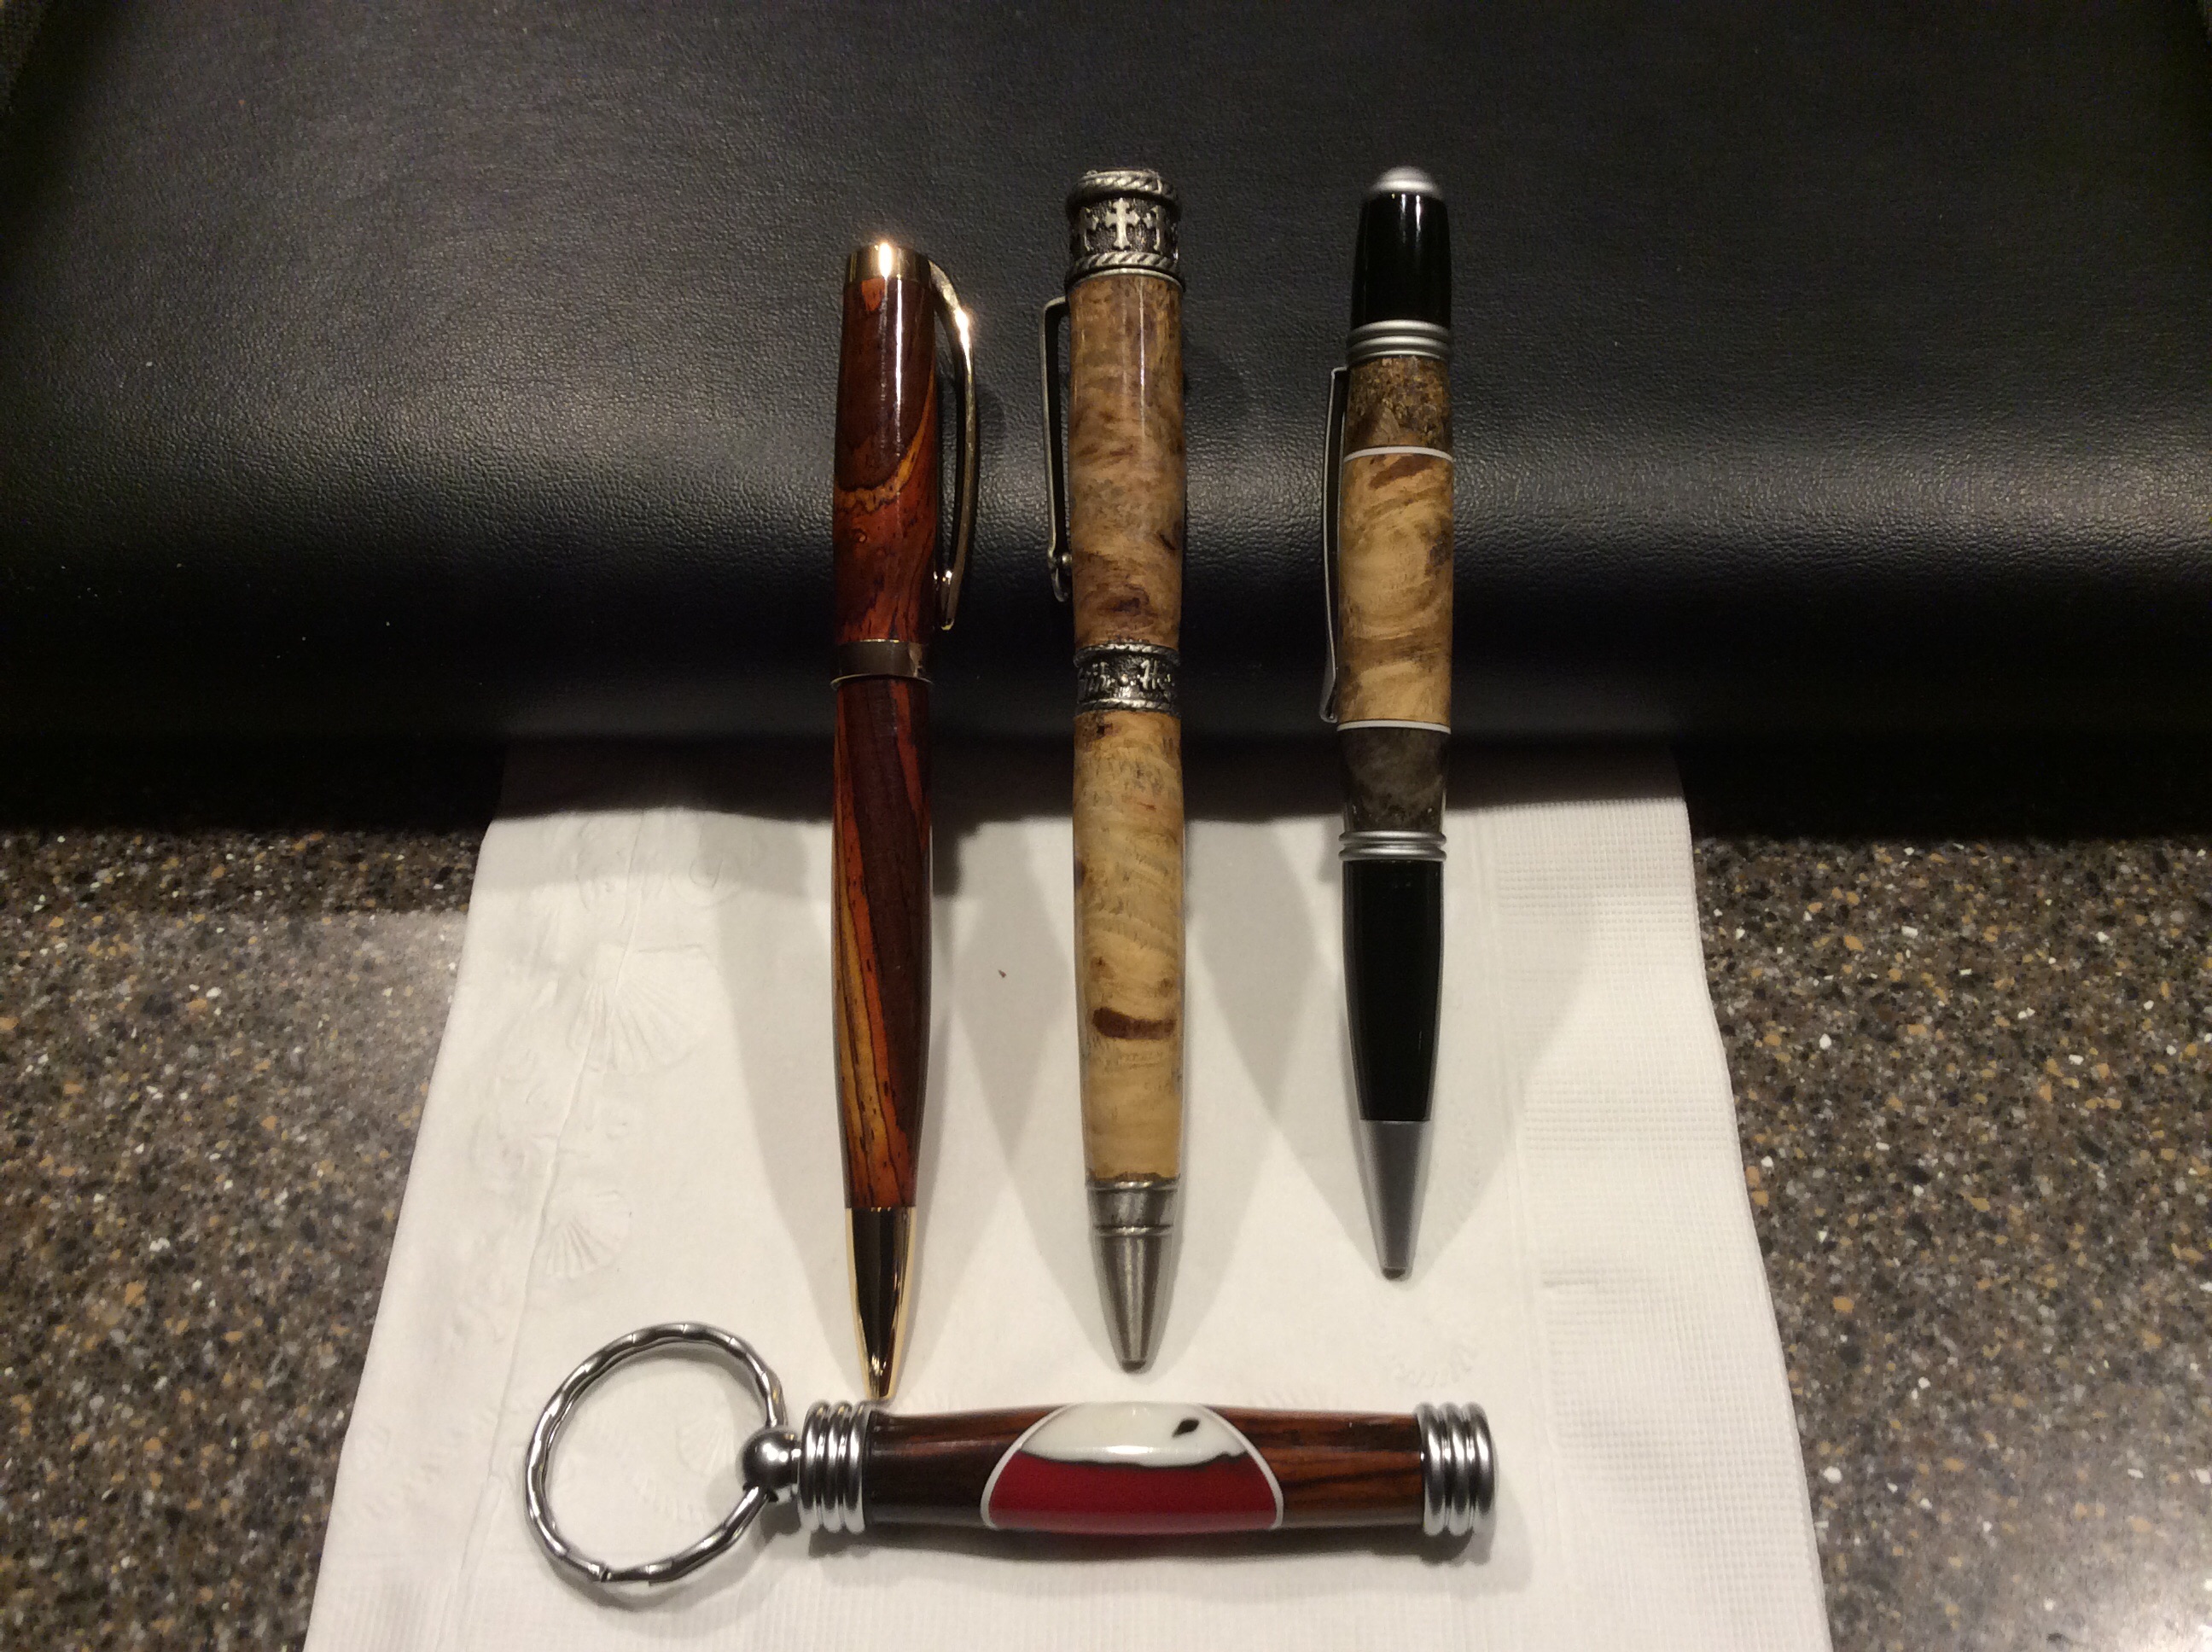 New to pen turning......